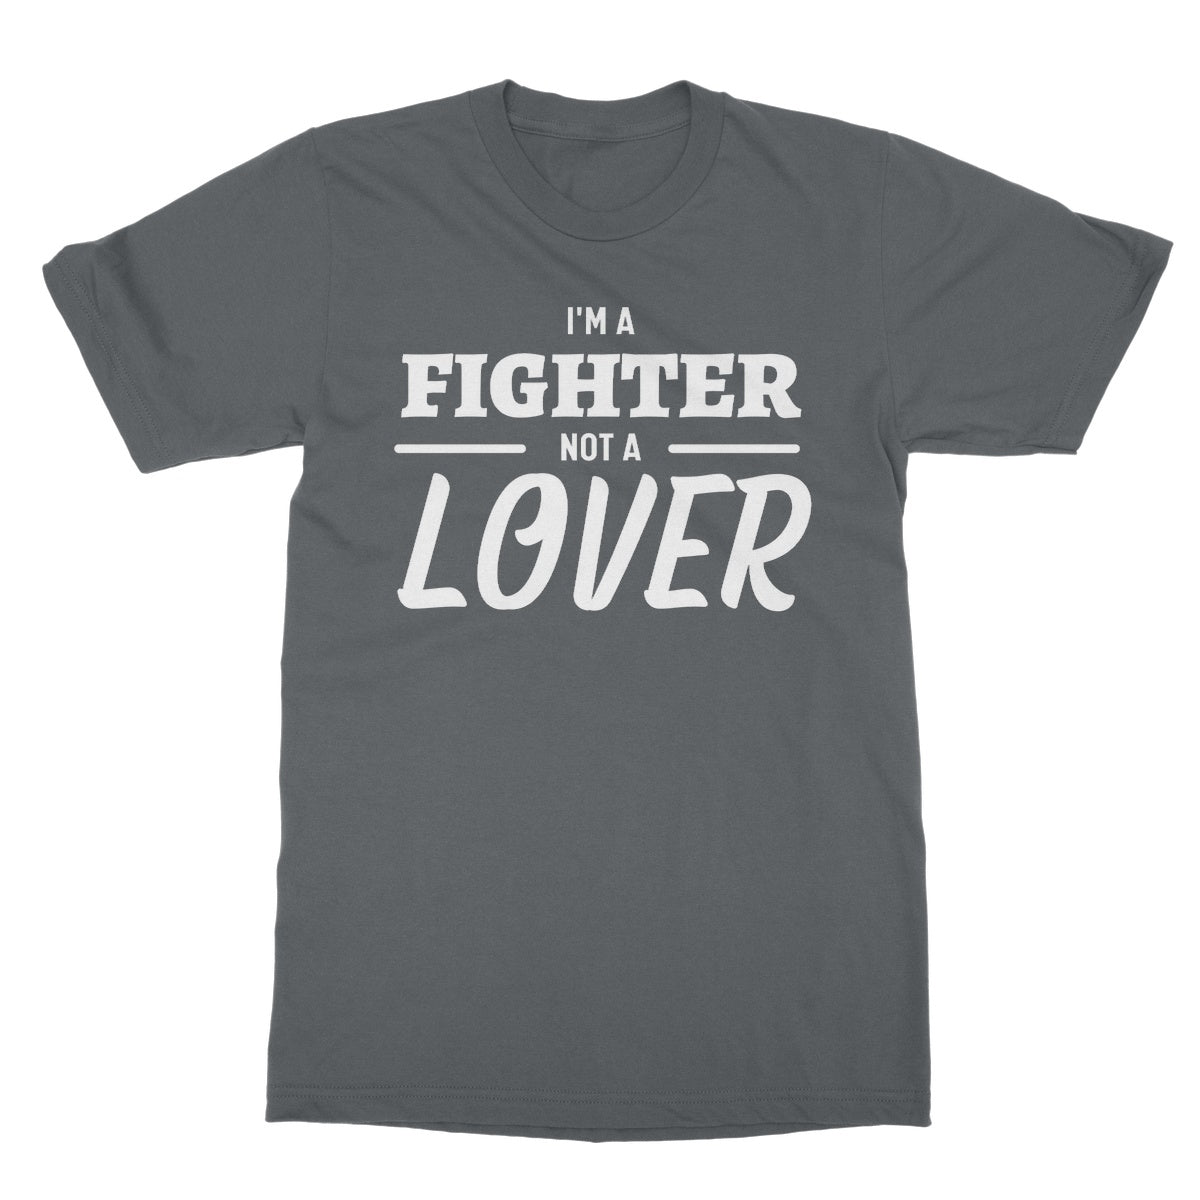 I'm a fighter not a lover t shirt grey